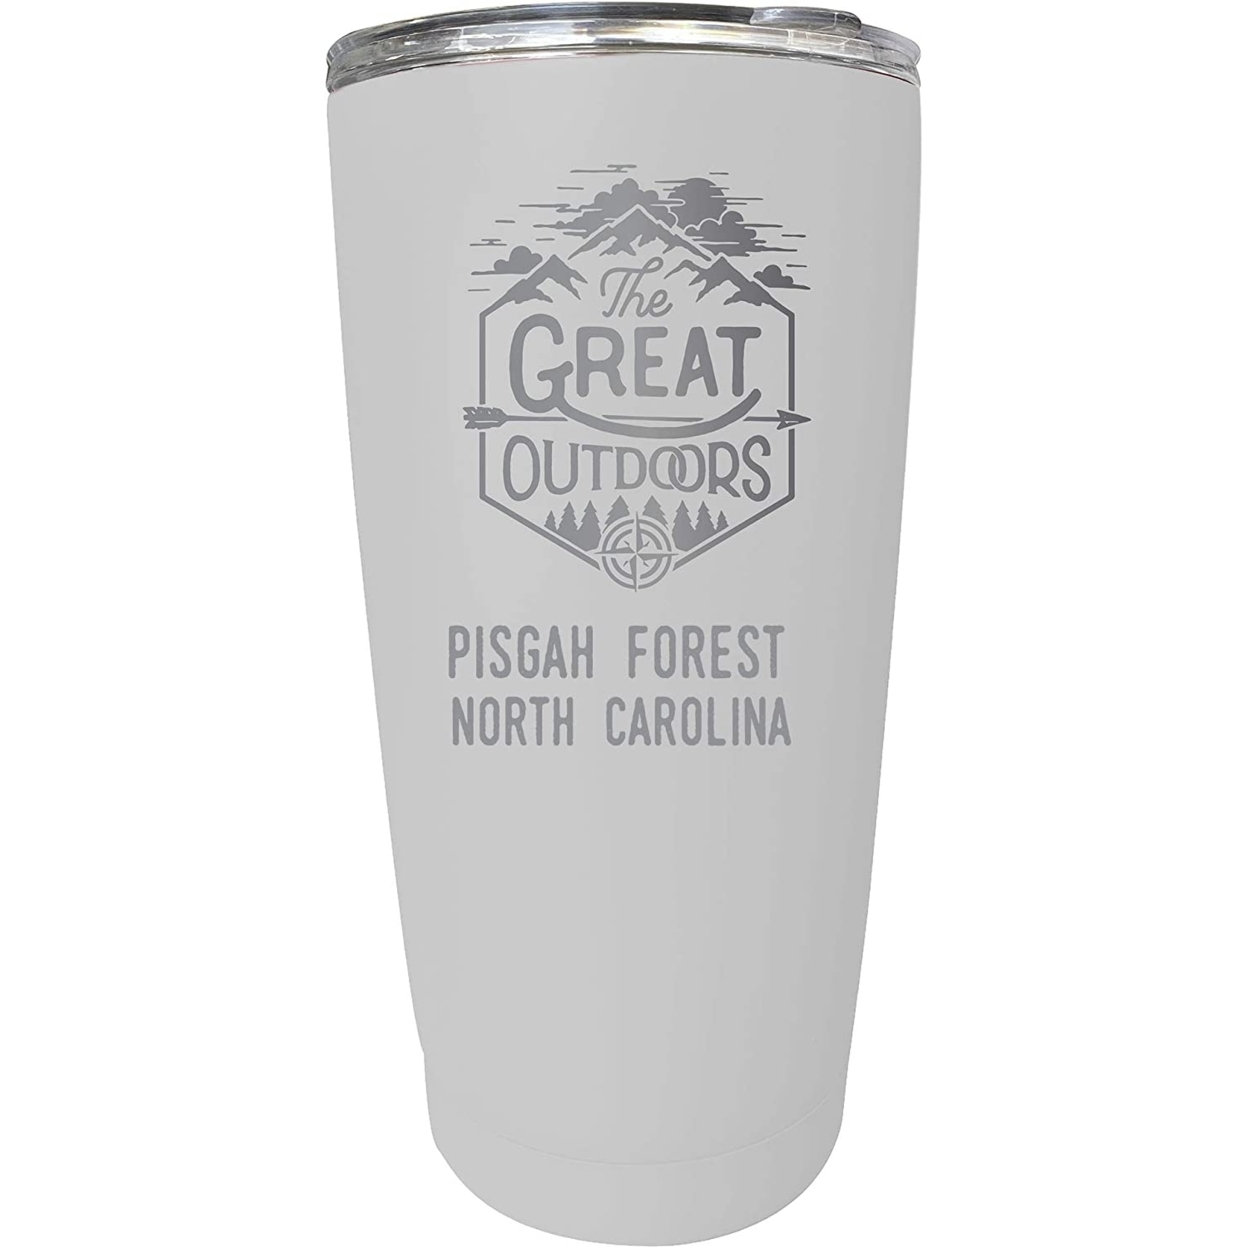 Pisgah Forest North Carolina Etched 16 Oz Stainless Steel Insulated Tumbler Outdoor Adventure Design - White